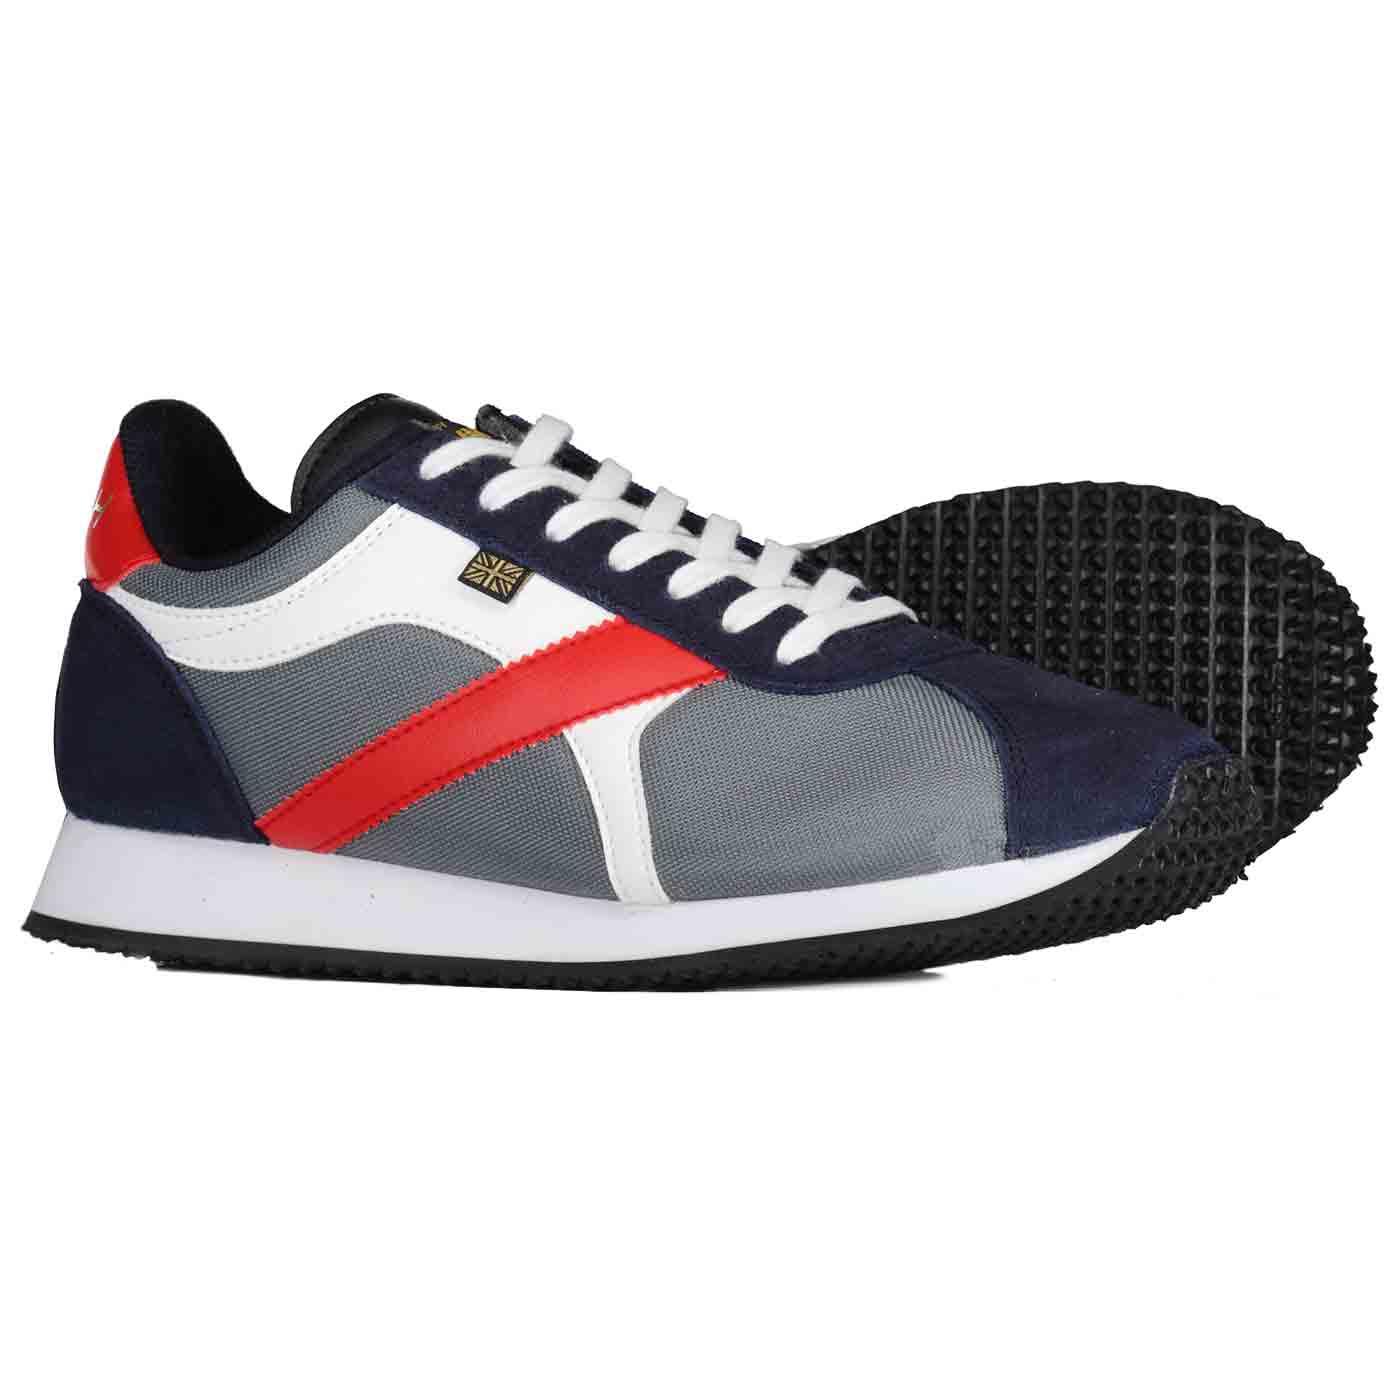 WALSH Tornado Eight3 Made in England Trainers in Grey/Navy